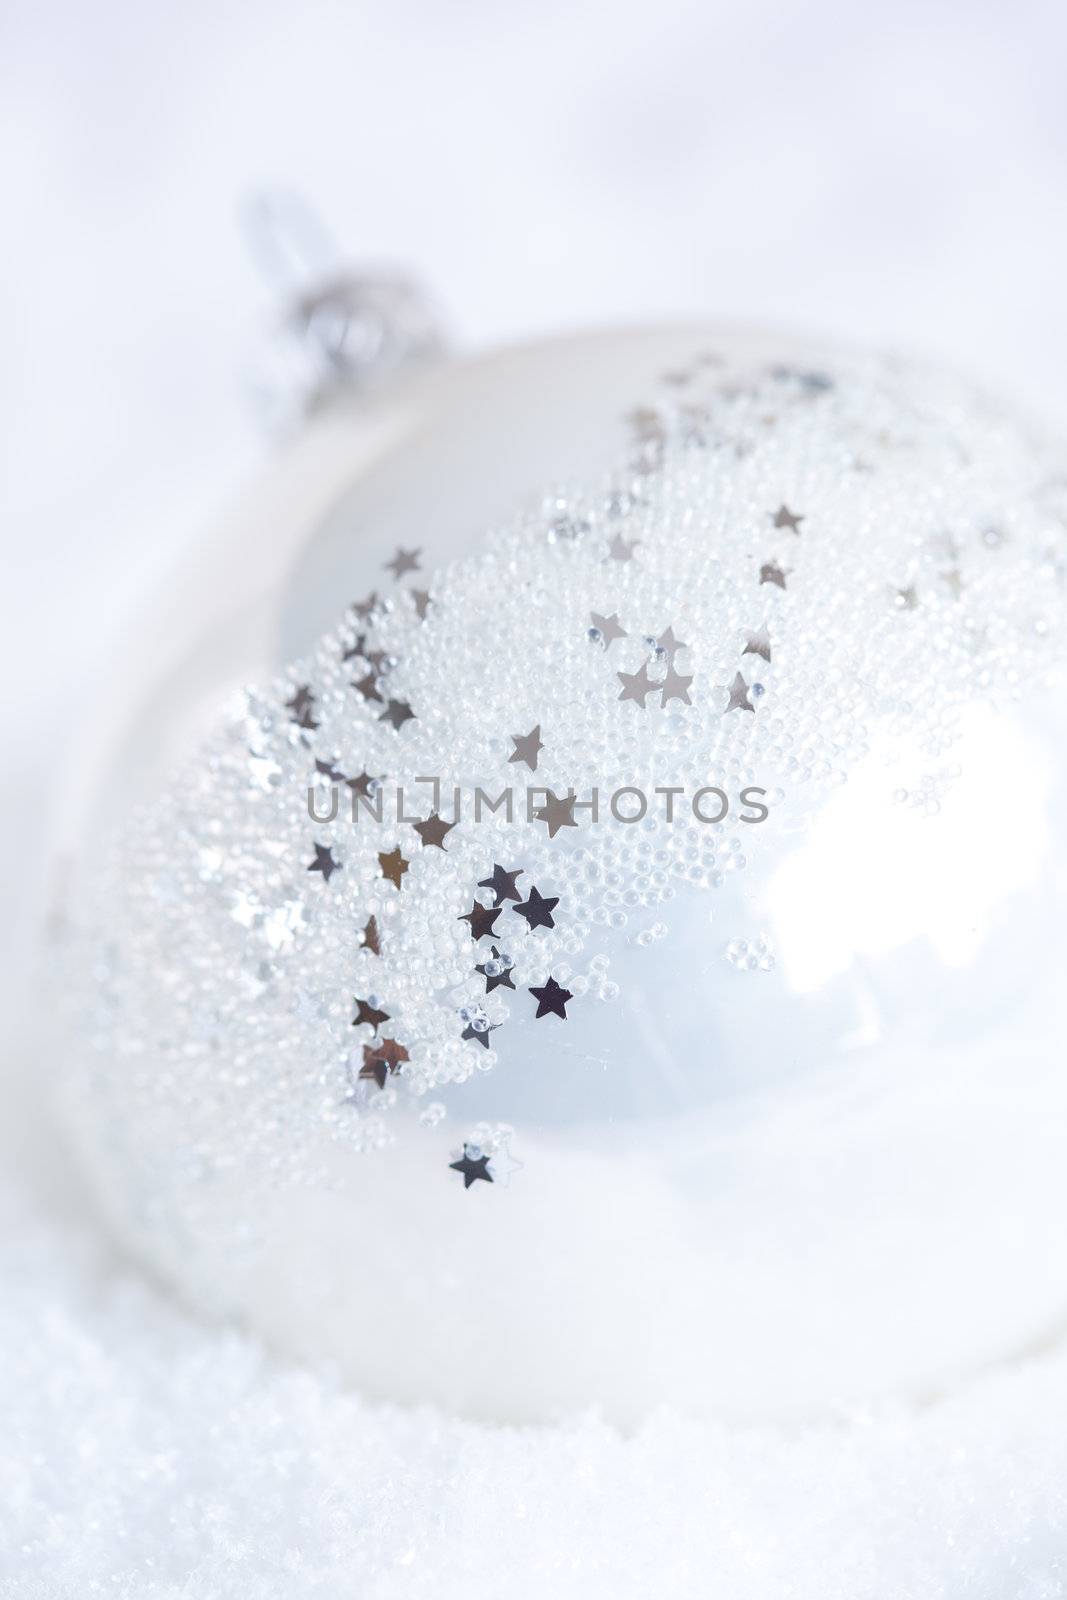 Large bauble by Fotosmurf